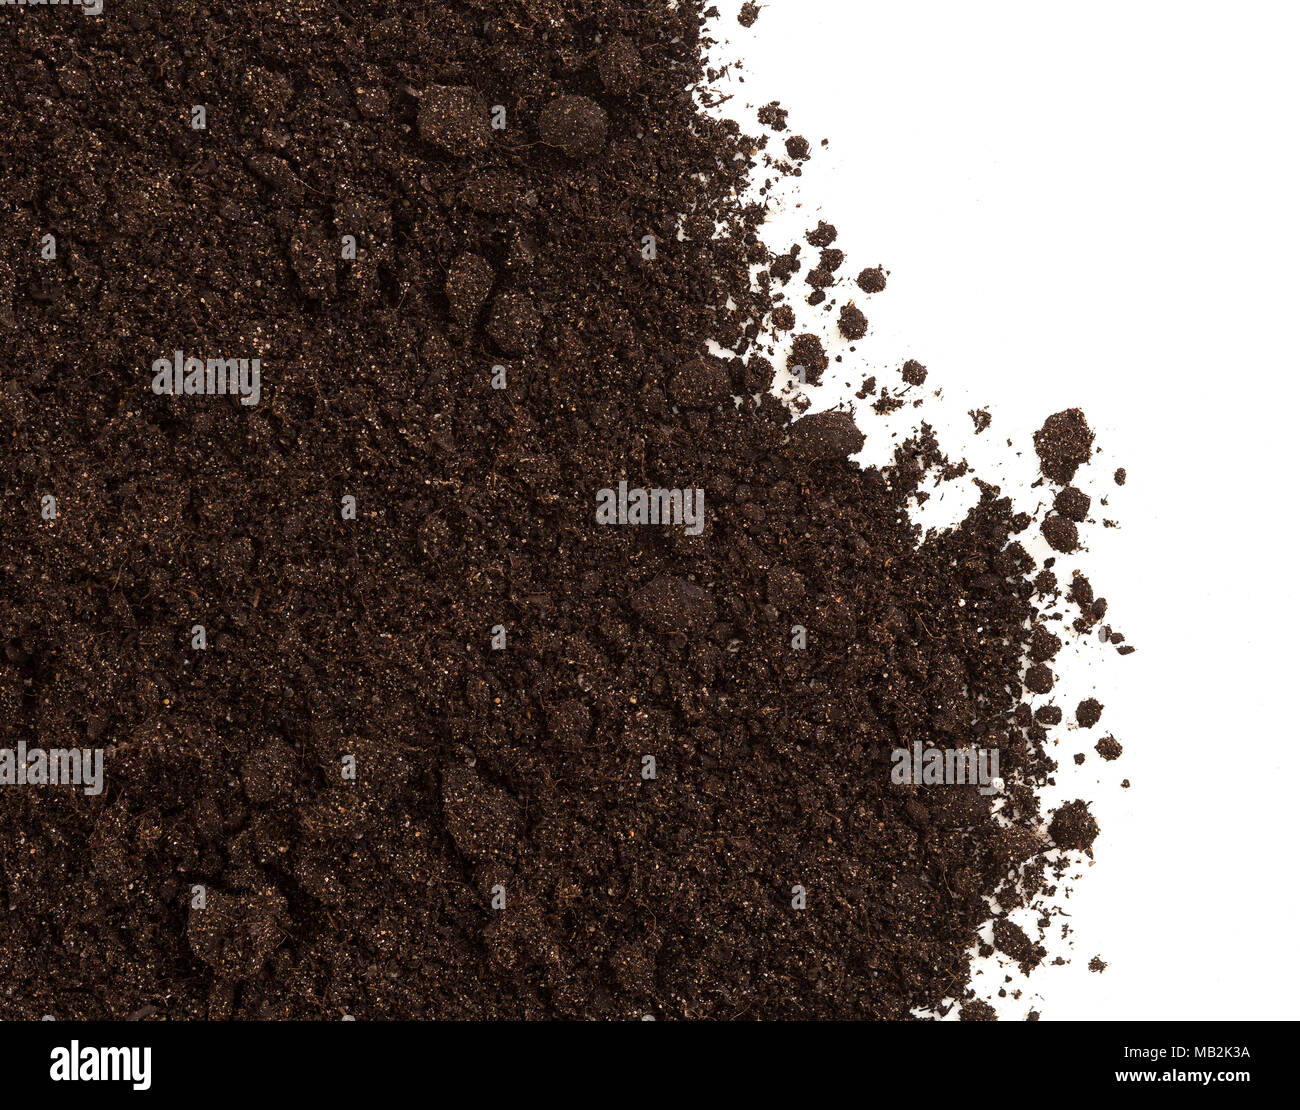 Soil or dirt crop isolated on white Stock Photo